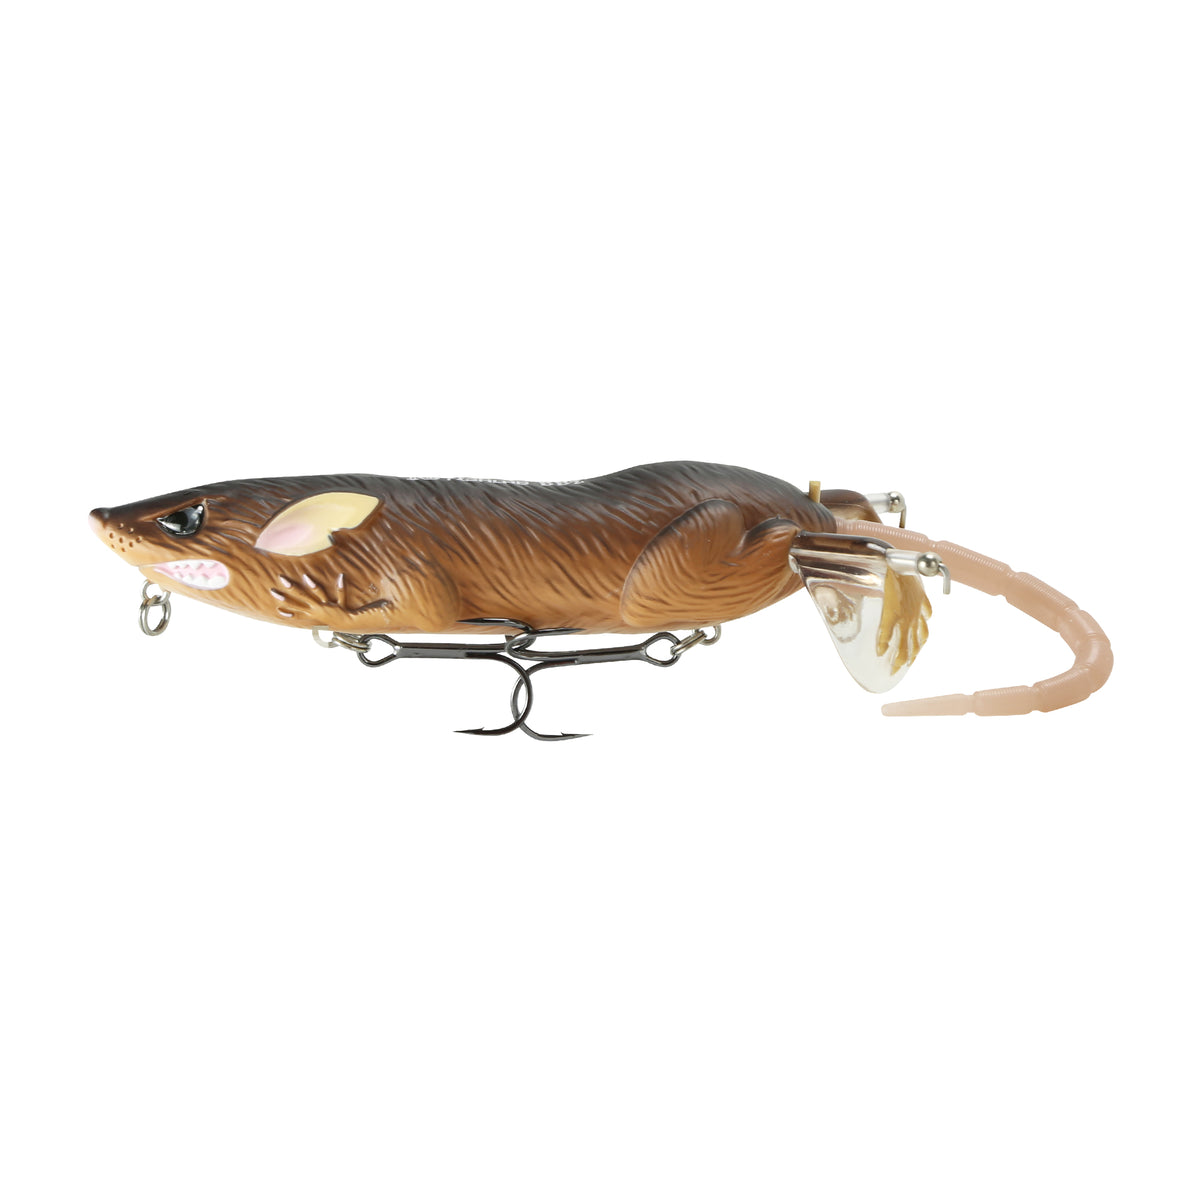 3516 Casting Water Rat Fishing Lures